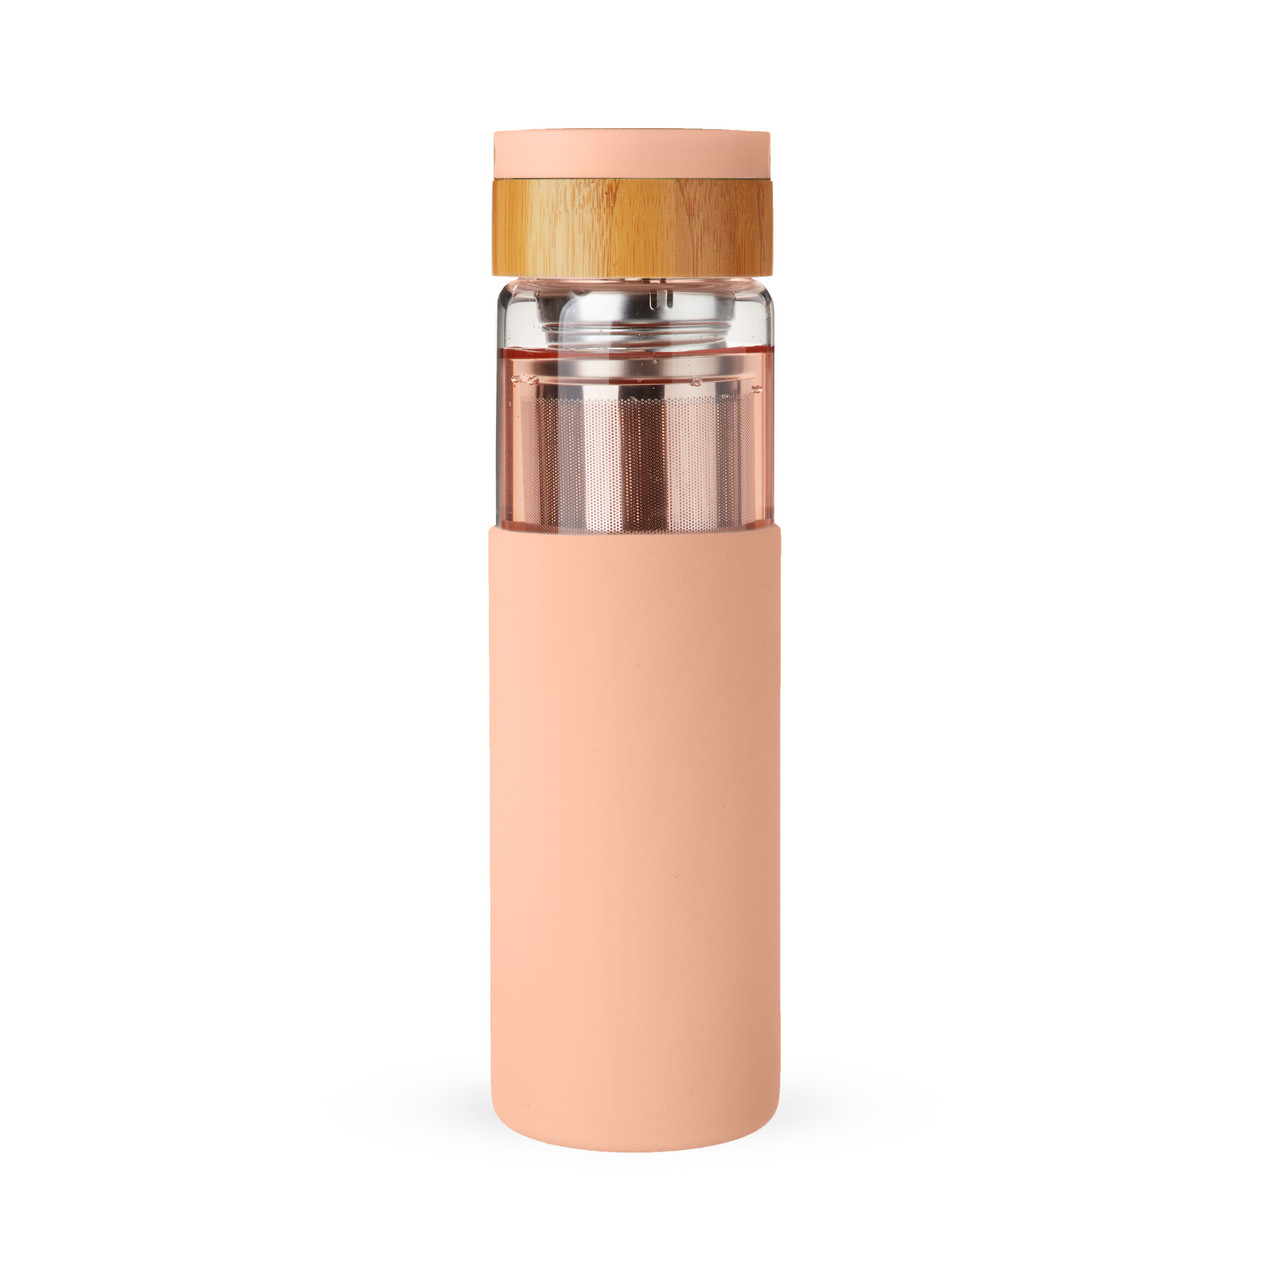 Dana Glass Travel Mug in Coral by Pinky Up